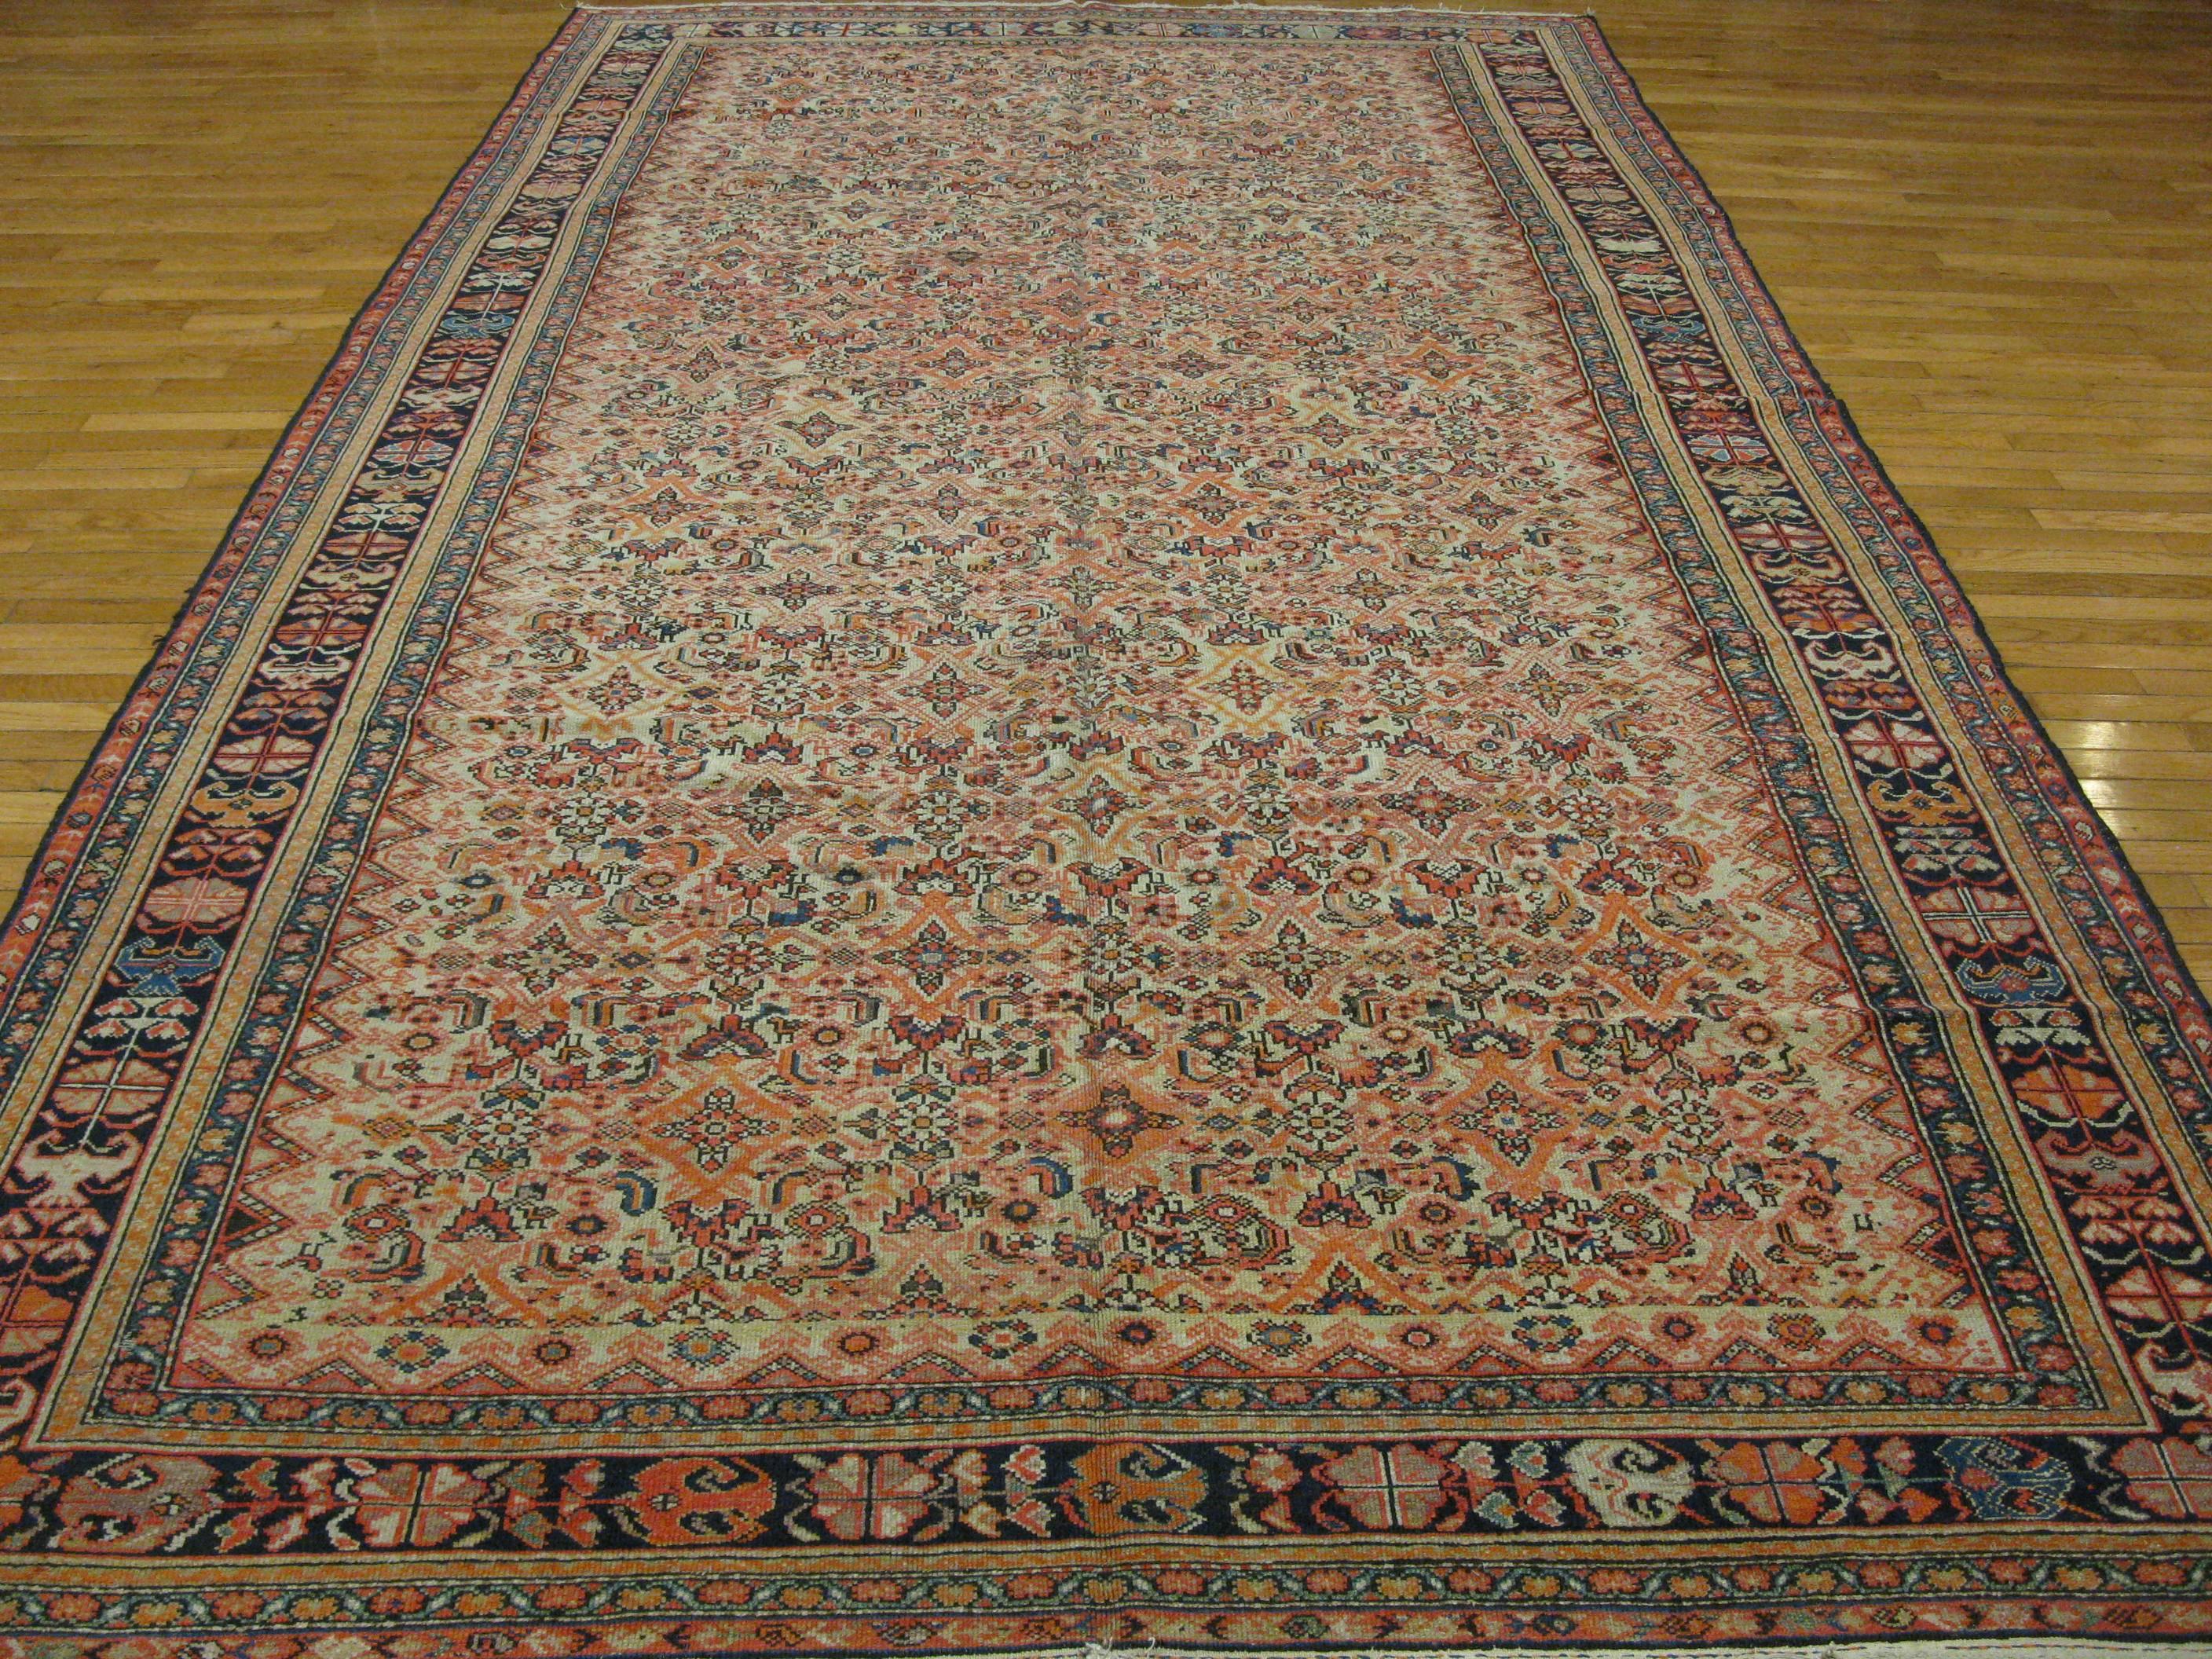 This beautiful hand-knotted gallery size rug was made in the village of Malayer in Iran (Persian). The rug has an all-over Herati pattern made with wool dyed with natural colors on a cotton foundation. It measures 7' x 13' 2''.